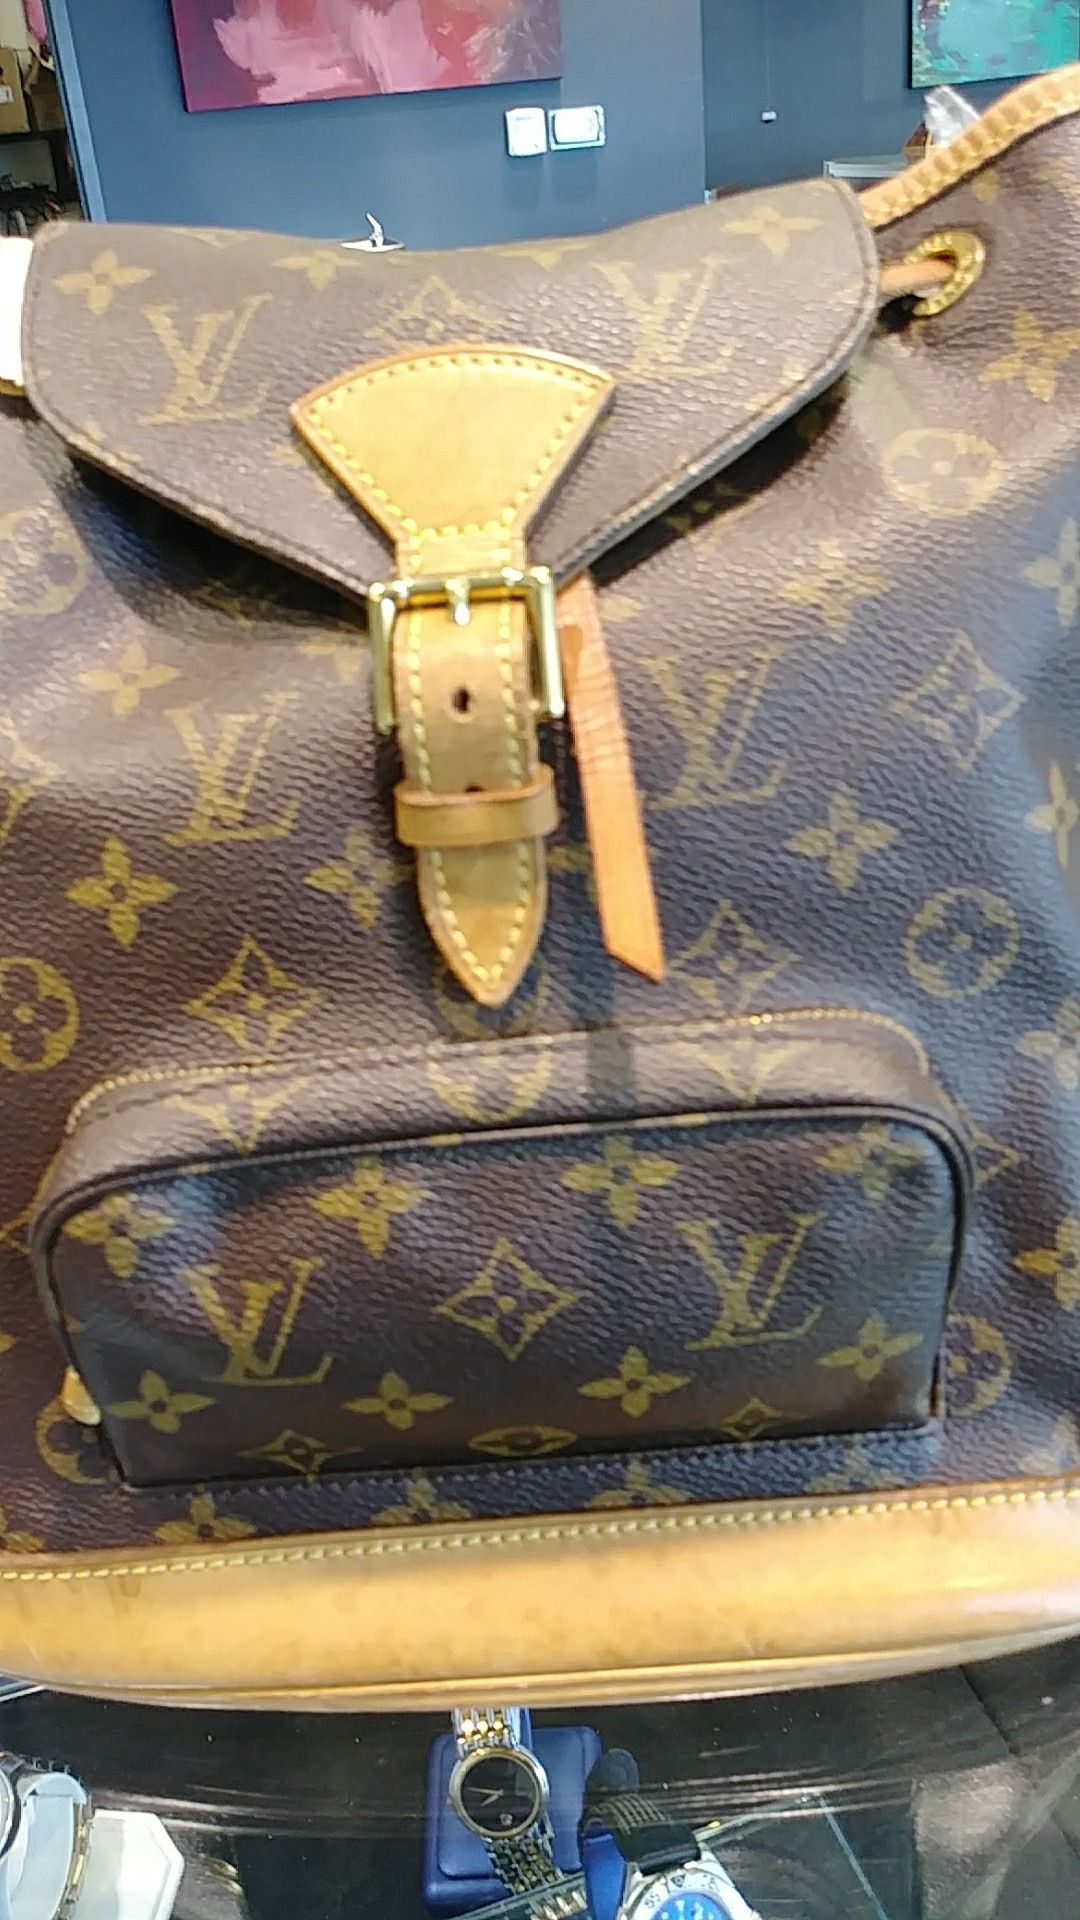 Louis vuitton backpack"ask for wilma"